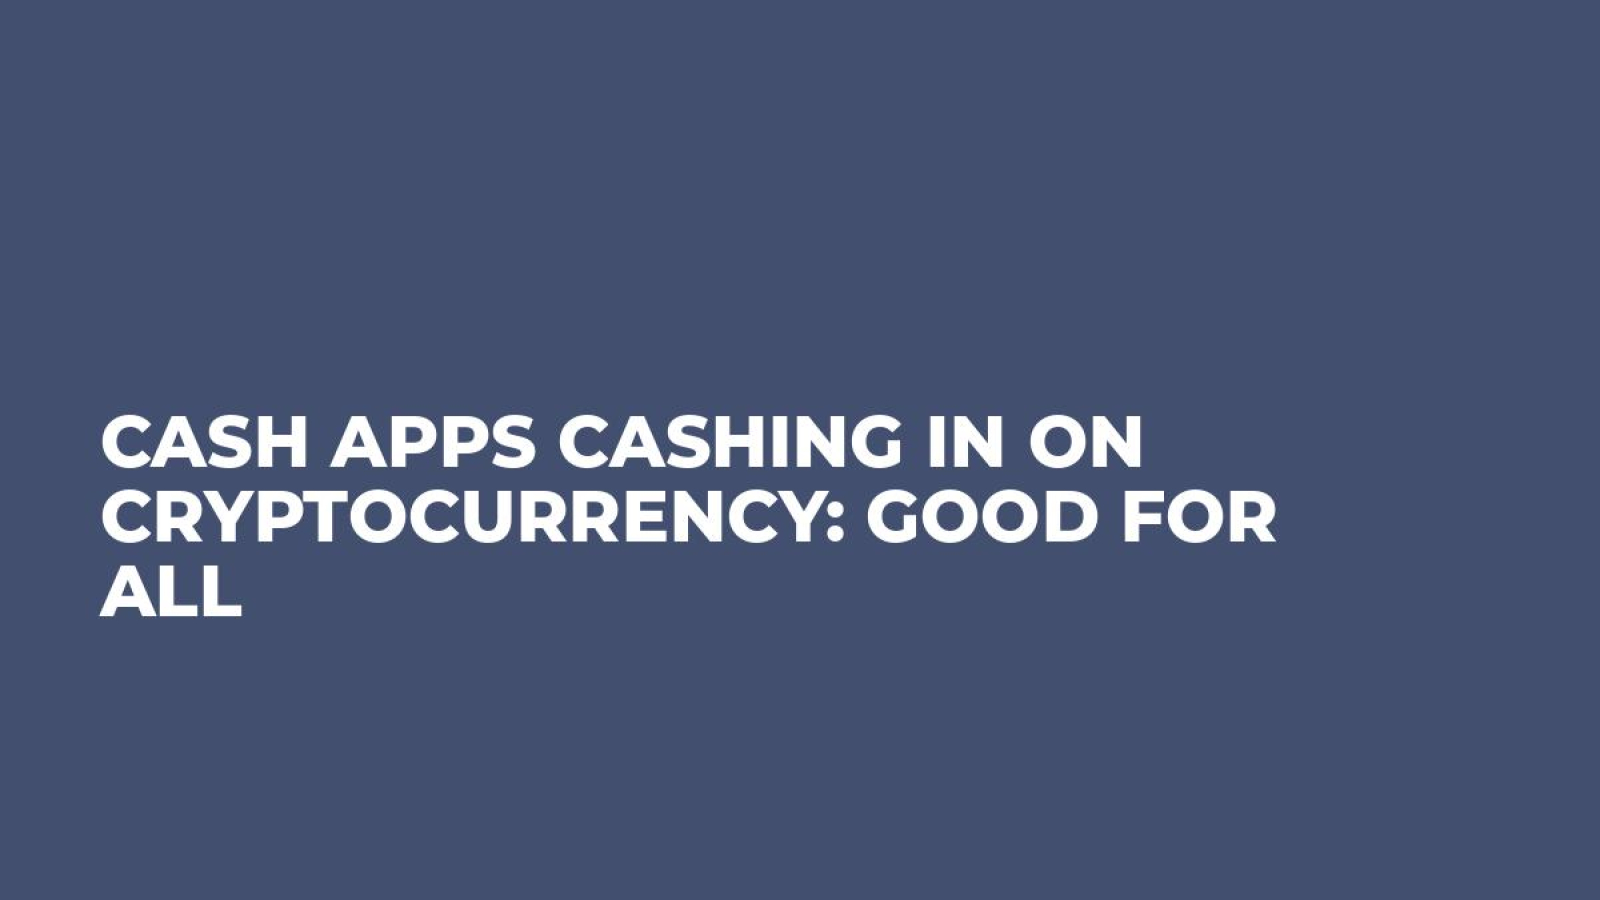 Cash Apps Cashing in on Cryptocurrency: Good For All